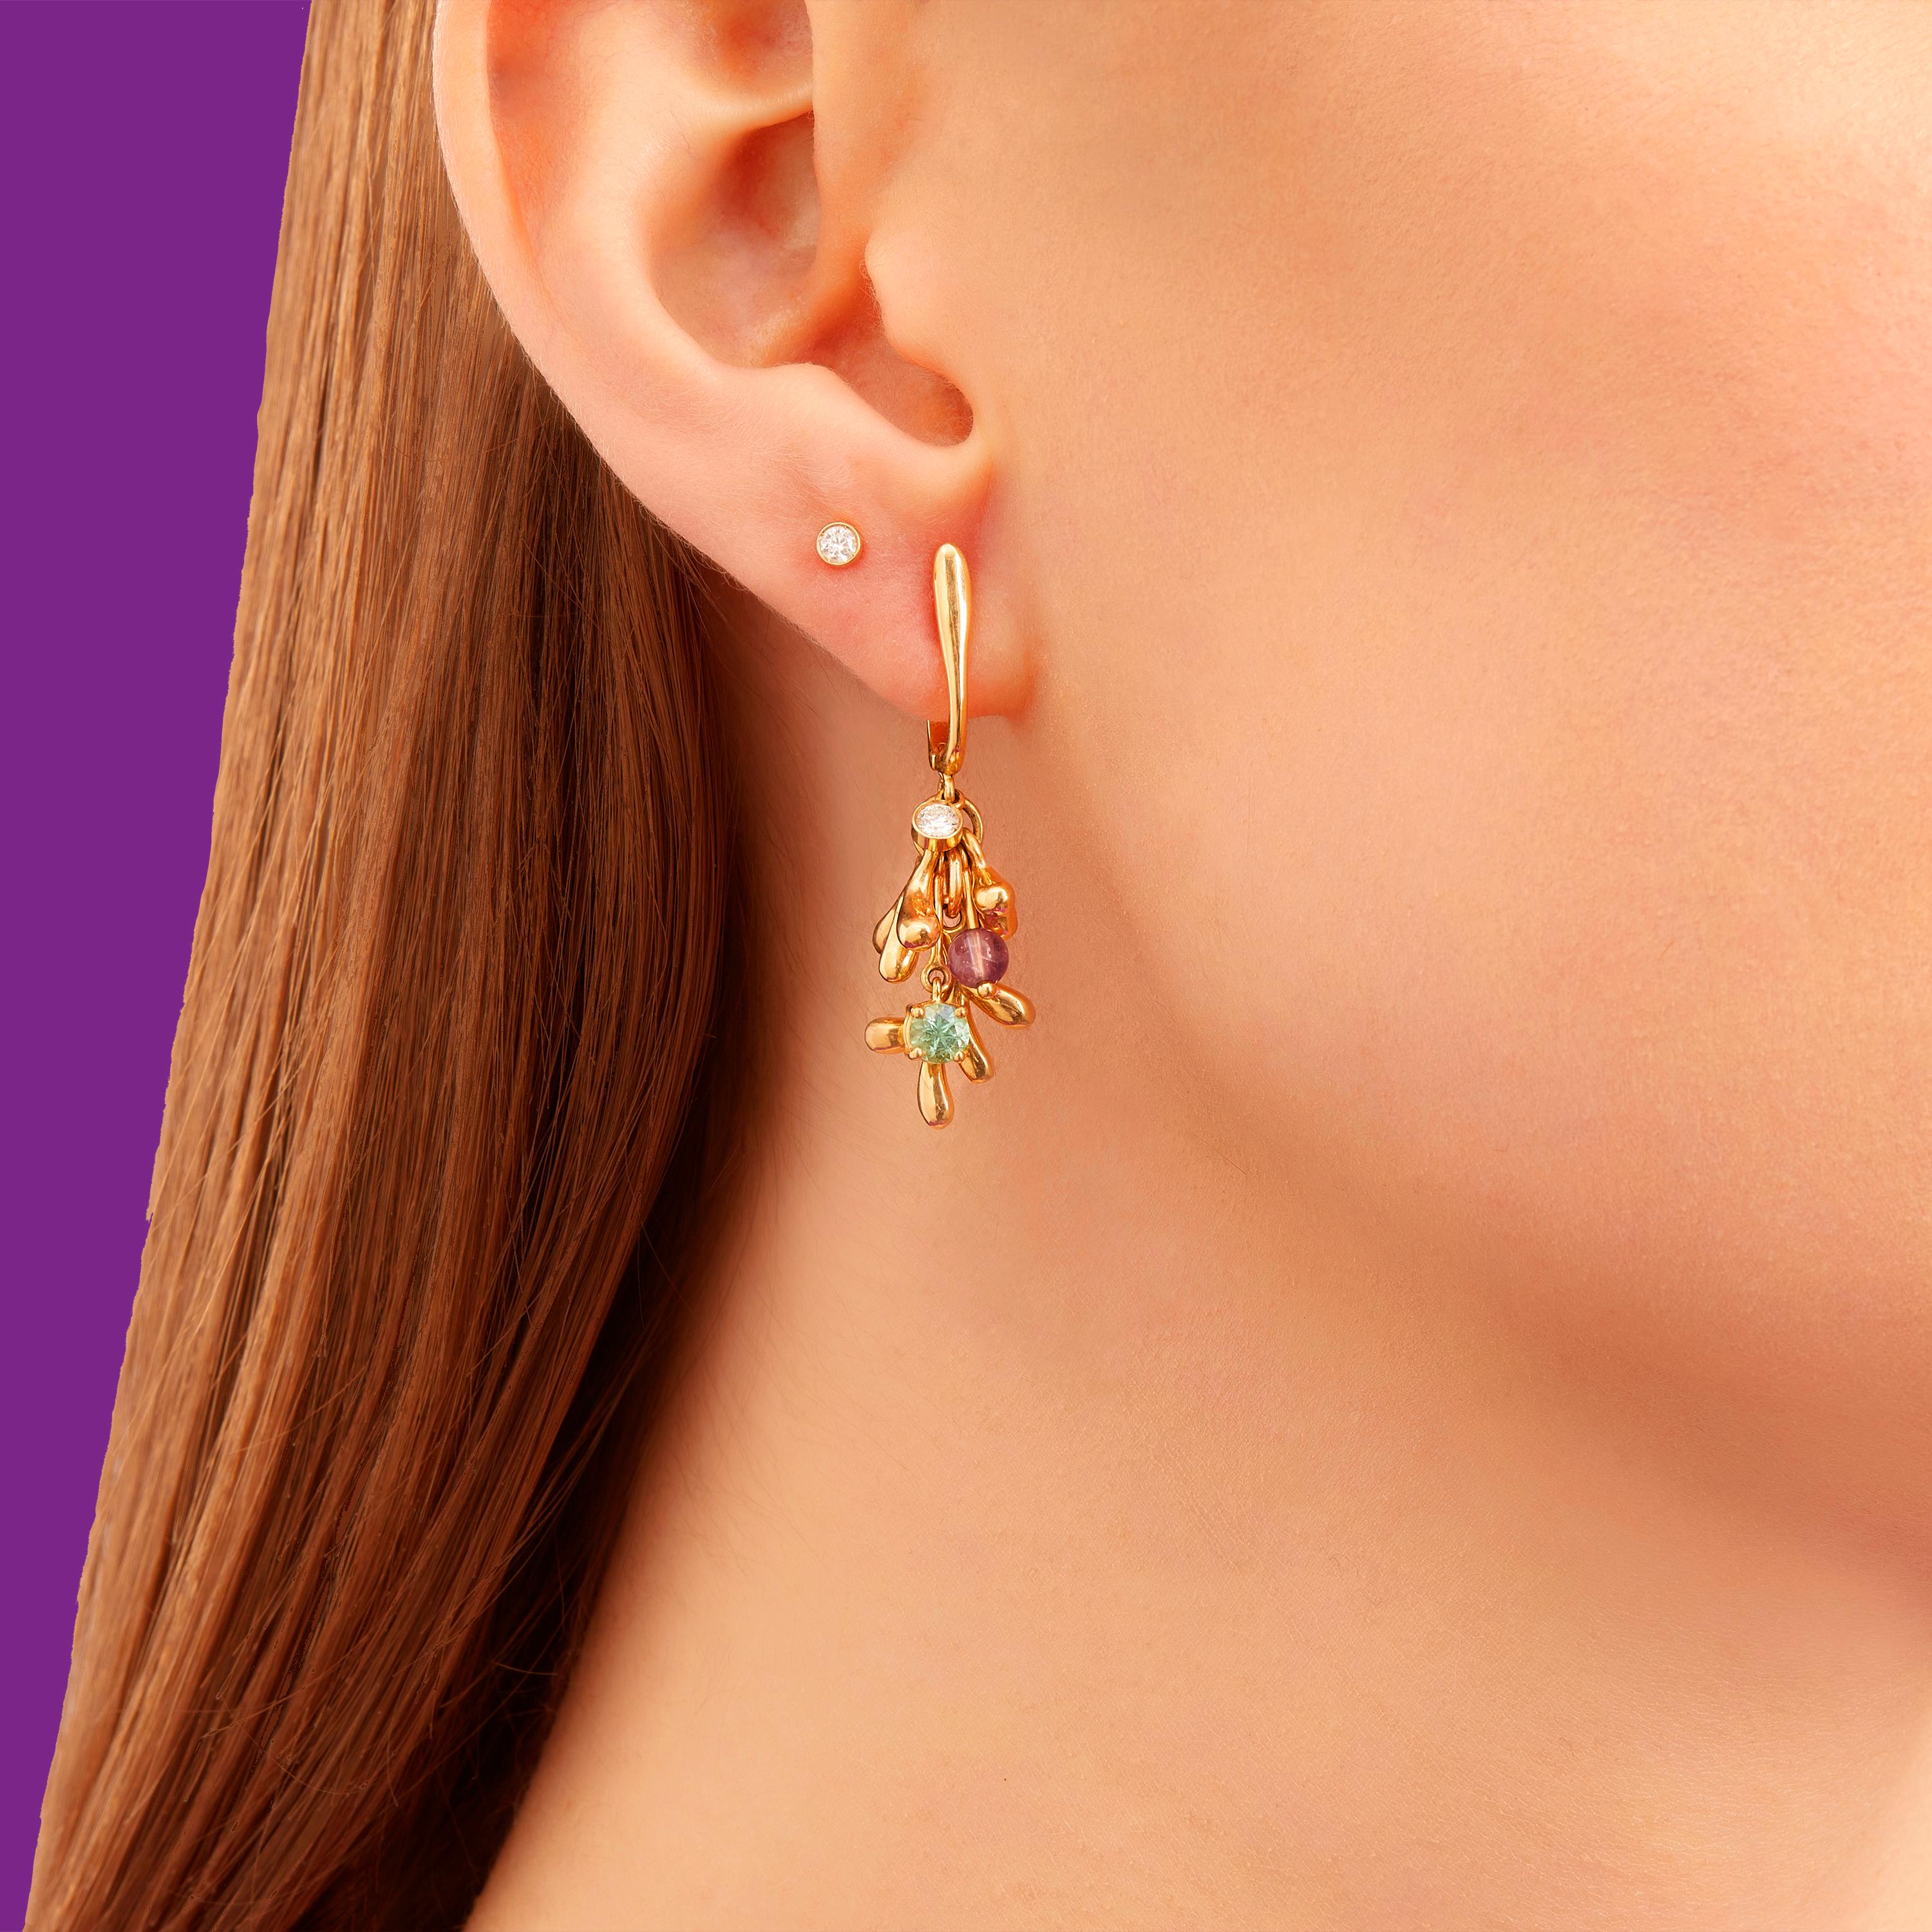 Springing forth from a lush magical wilderness are the JungleRemix pendant drop earrings with their clusters of gold leaves with well-rounded tips jingling and jangling to mimic the swaying movements of exotic flora in the heart of the rainforest.